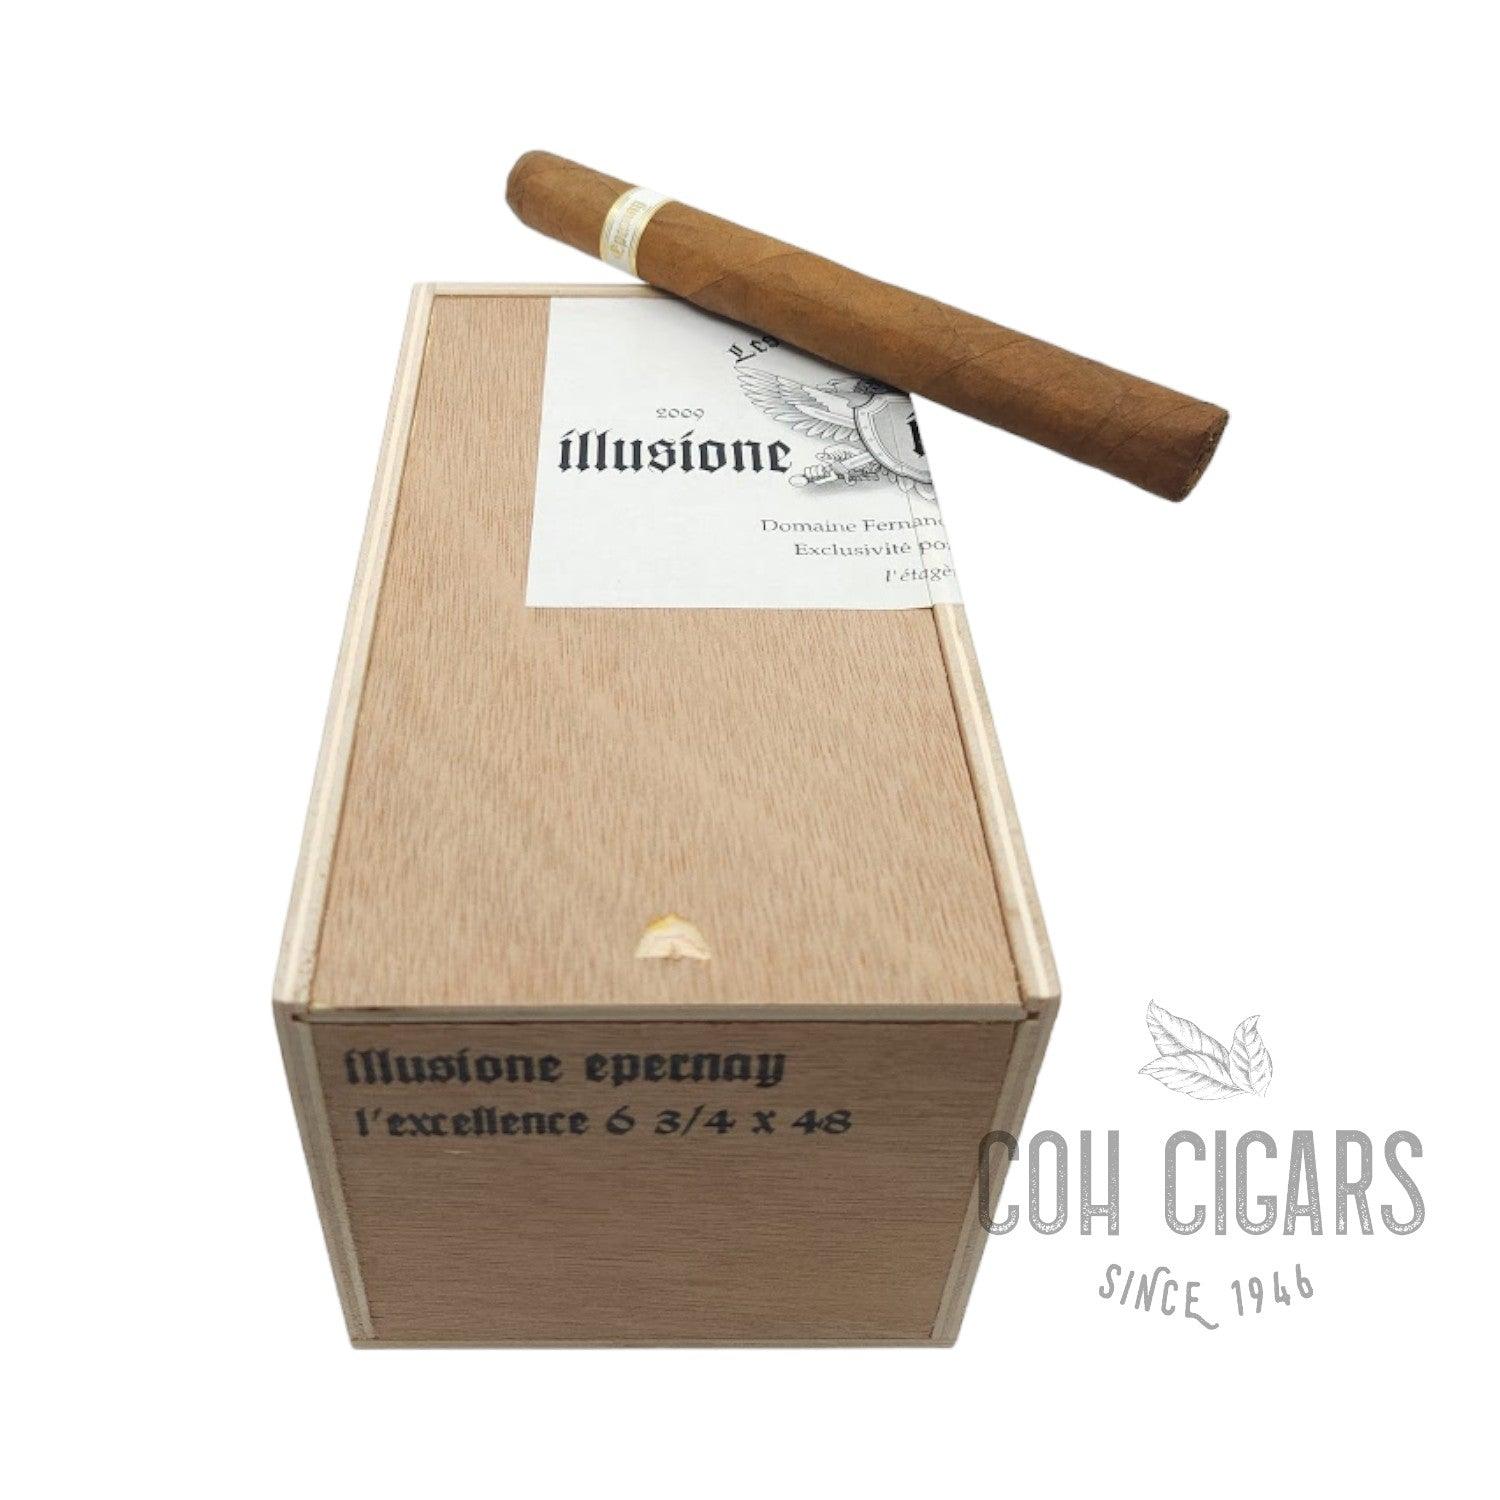 illusione Cigar | Epernay L'Excellence | Box 25 - hk.cohcigars